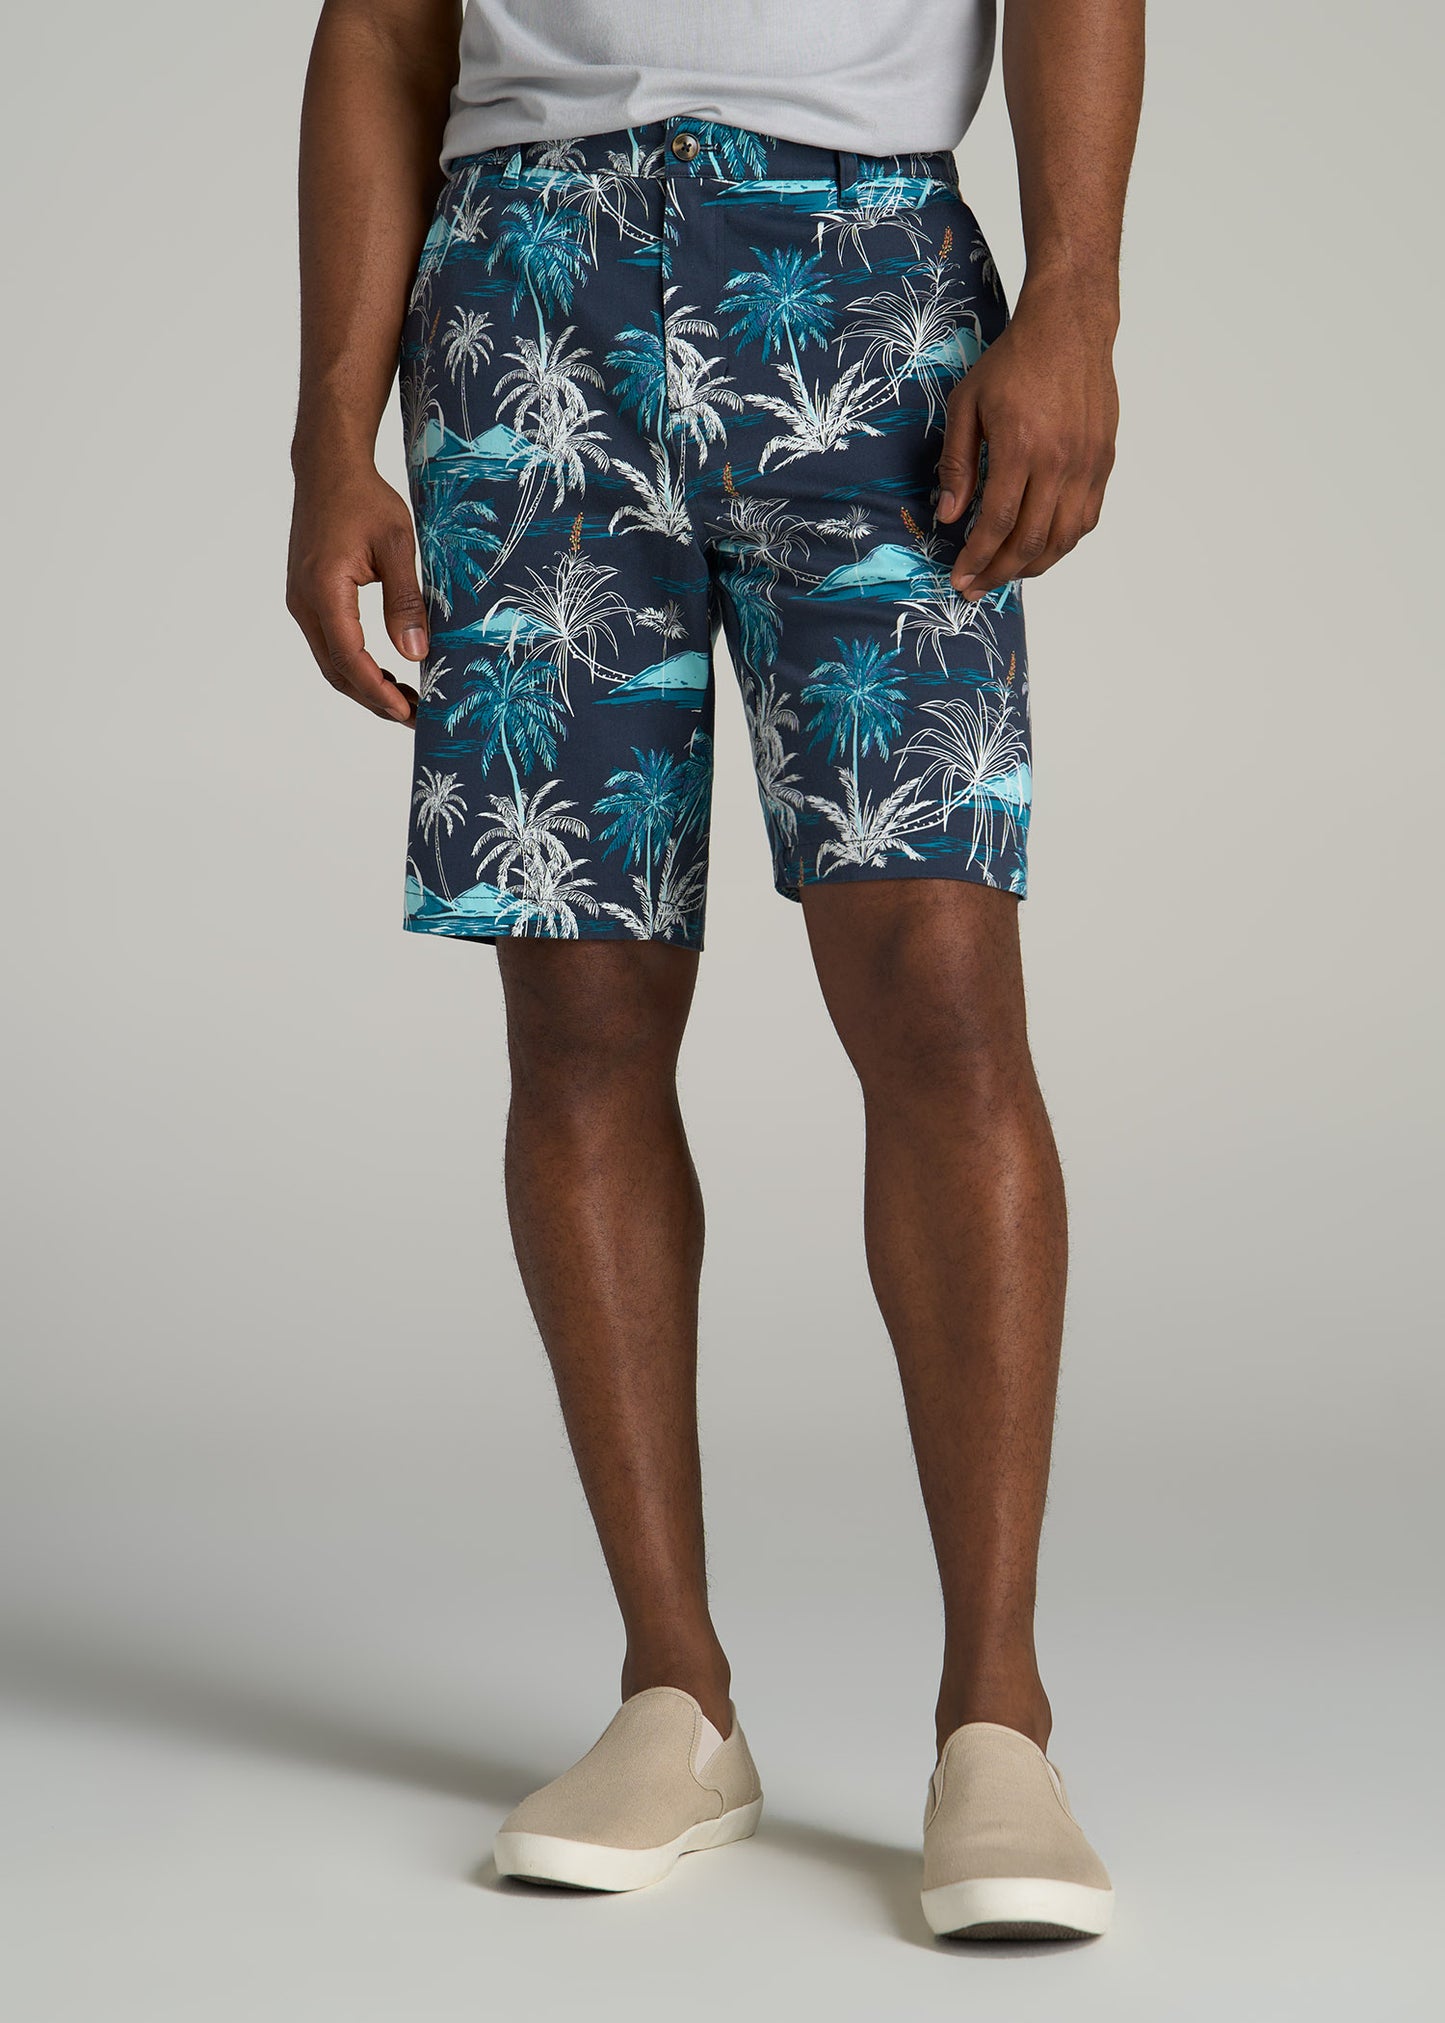 Printed Stretch Cotton Shorts for Tall Men in Blue and White Palms